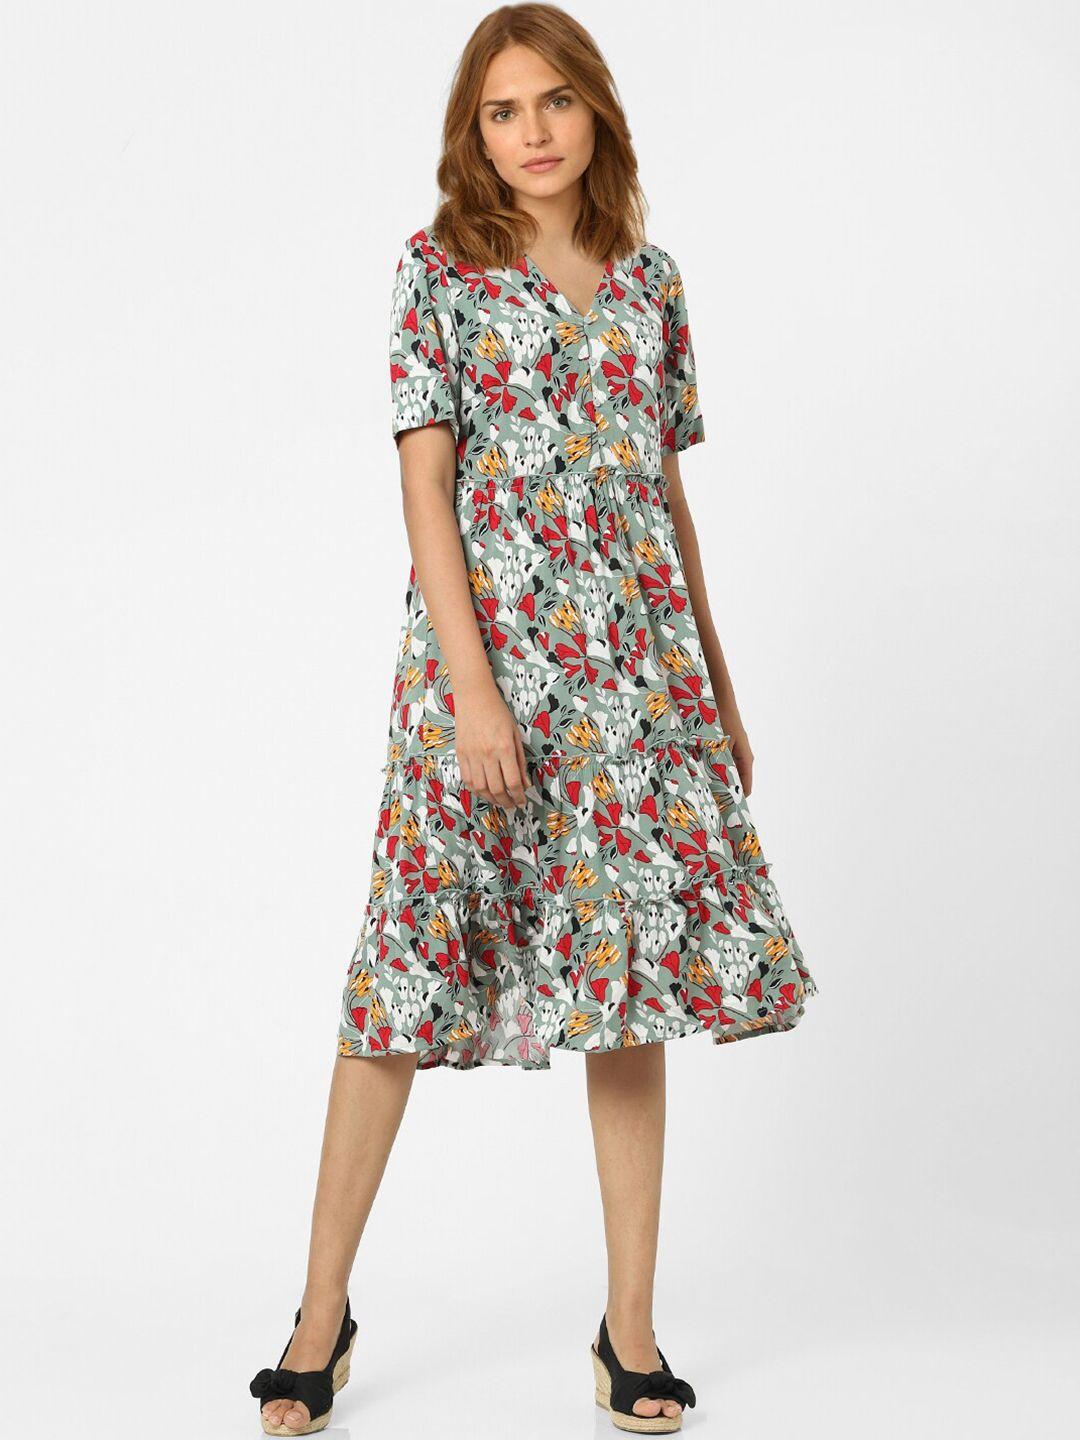 vero moda grey & multicoloured floral layered fit and flare dress